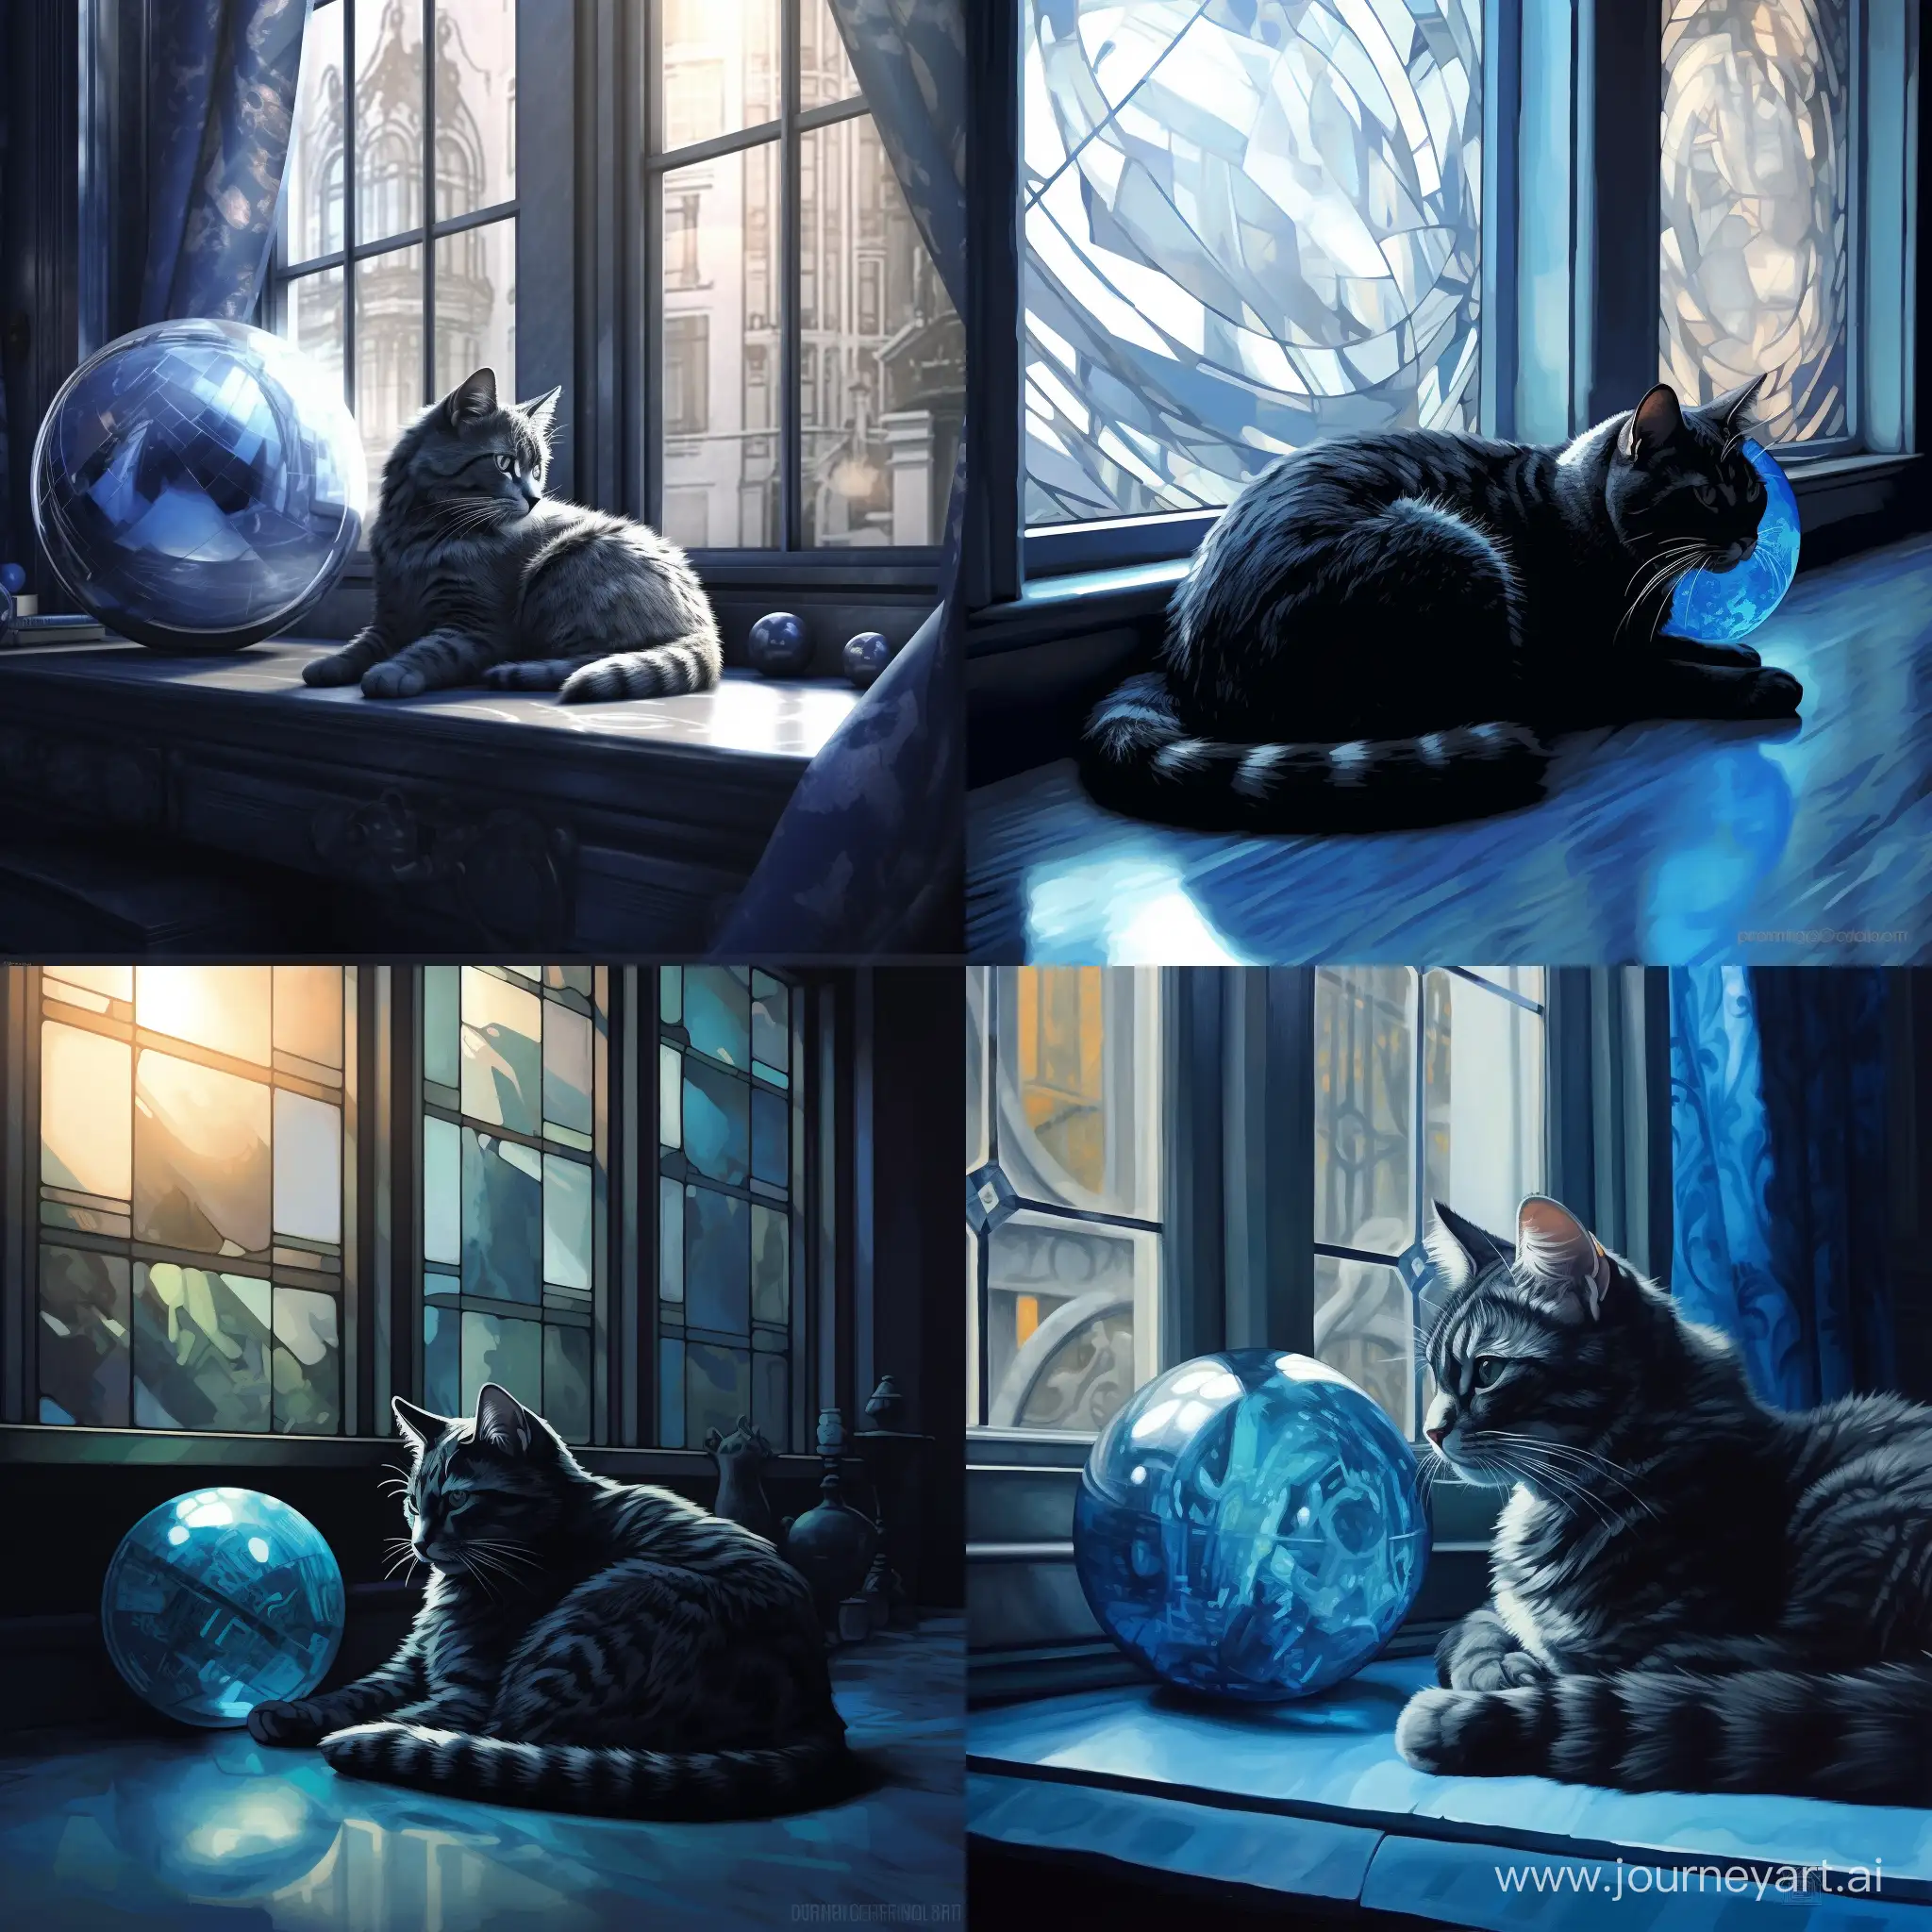 Blue-Cat-Resting-by-Window-with-Soft-Light-Reflections